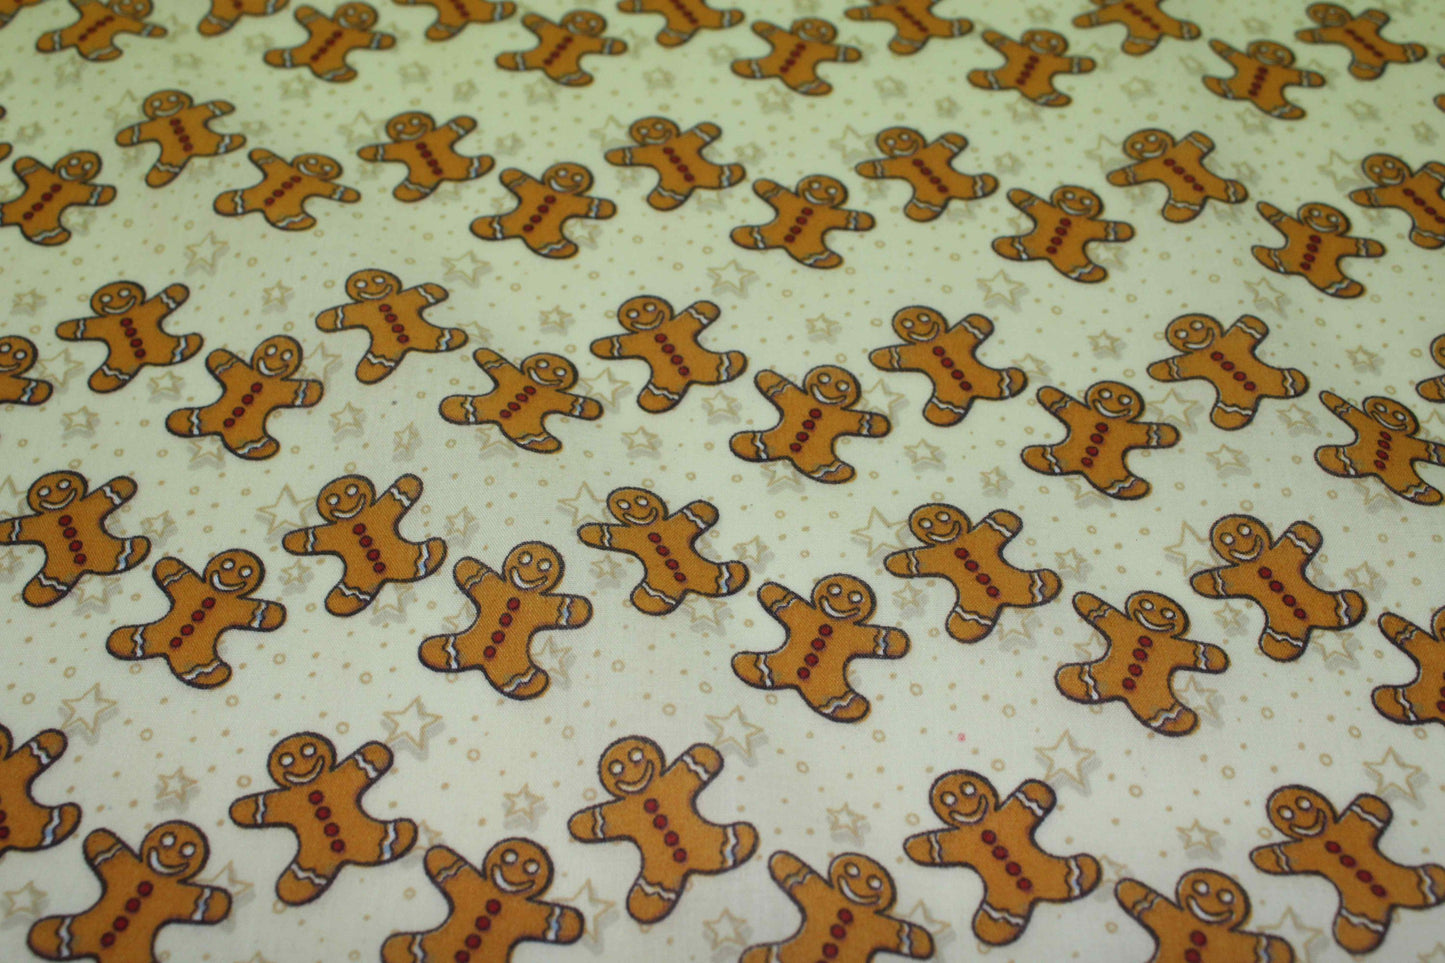 image of gingerbread men on yellow background fabric